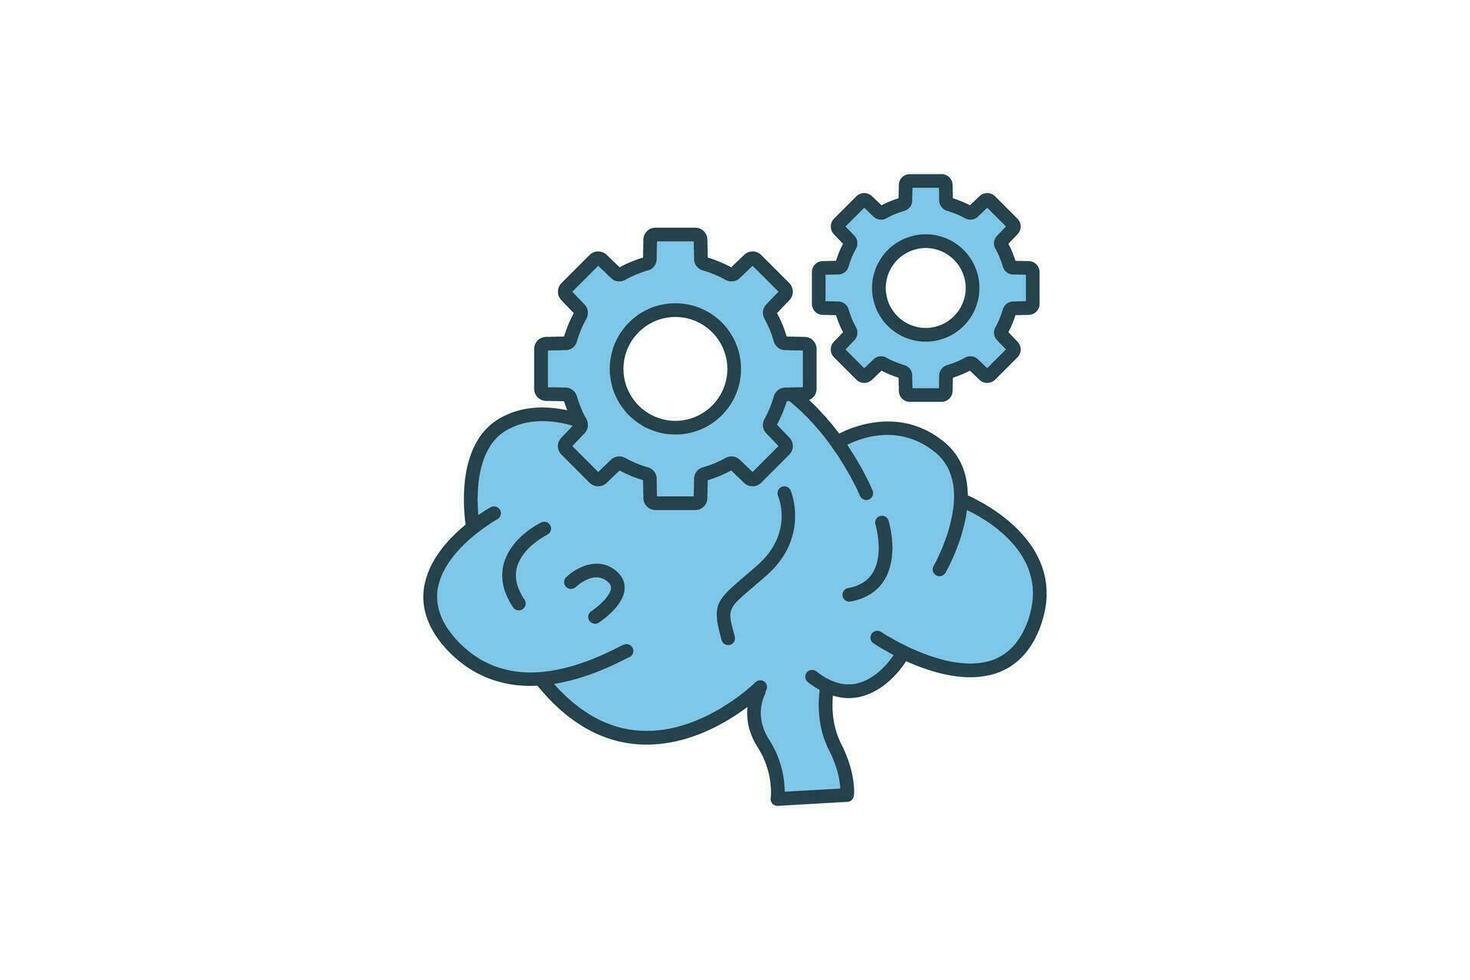 Thinking process icon. Brain icon with gear. icon related to critical thinking . suitable for web site design, app, user interfaces, printable etc. Flat line icon style. Simple vector design editable